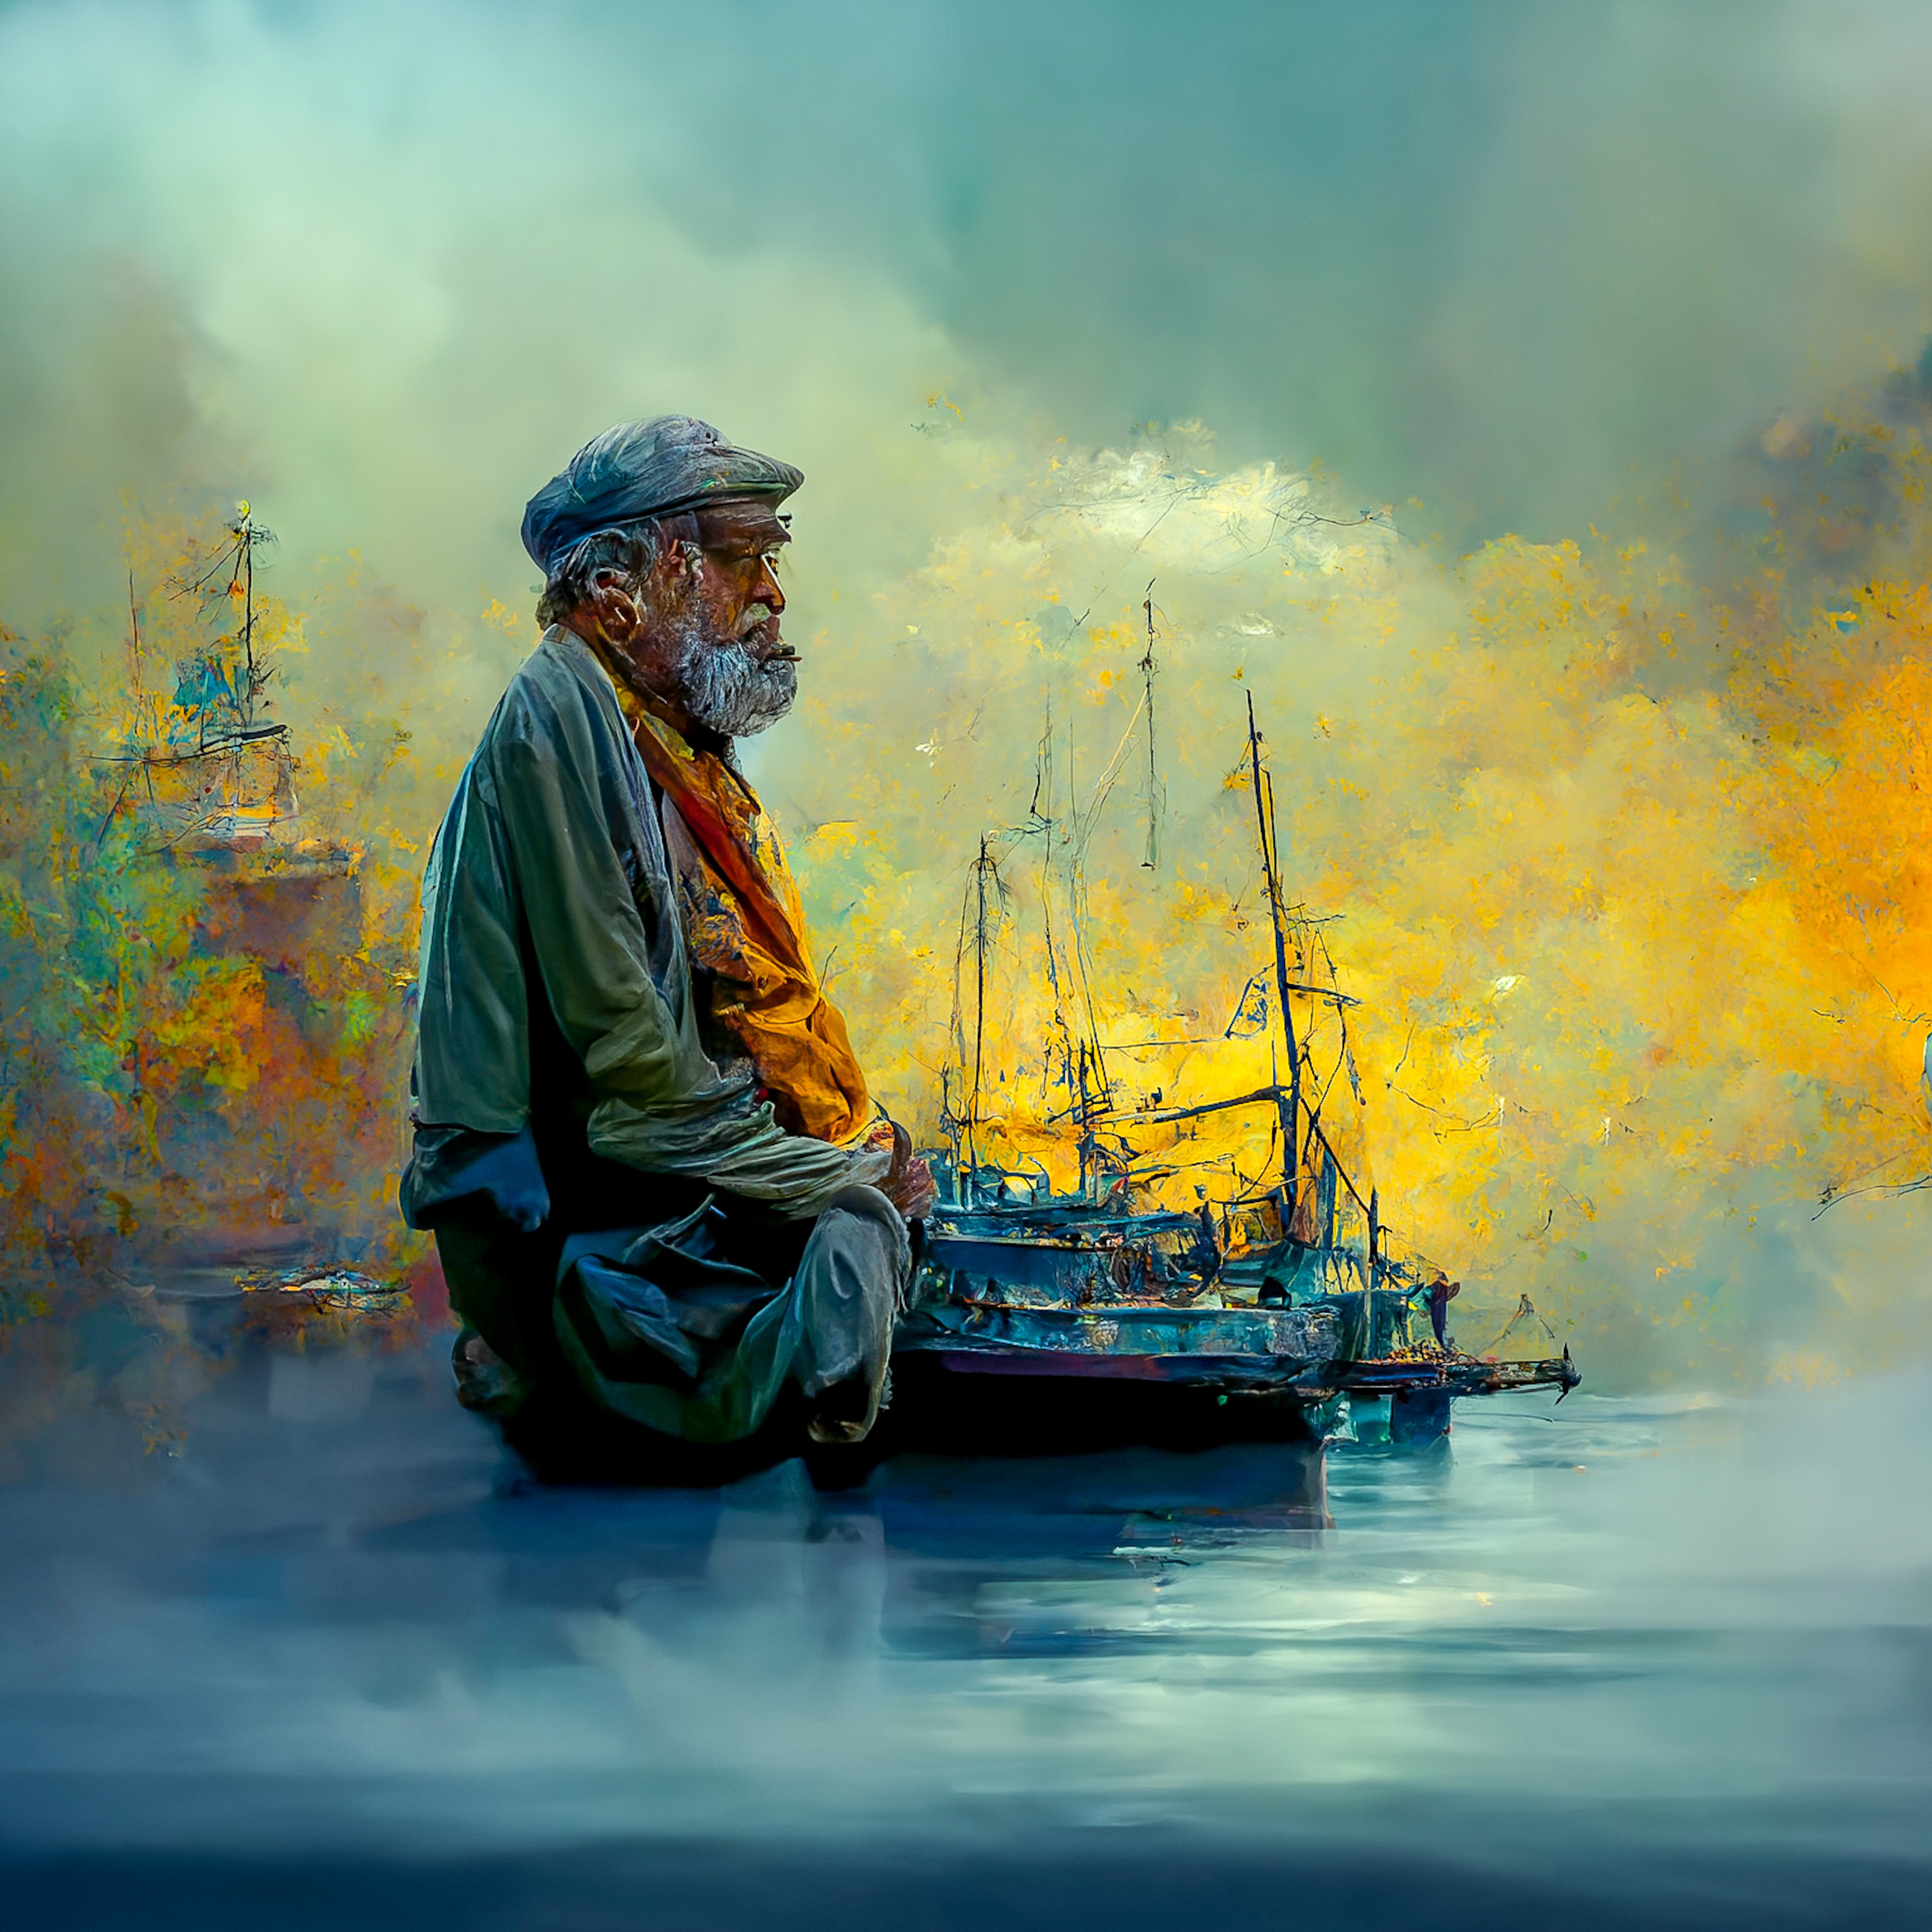 The Lonely Fisherman